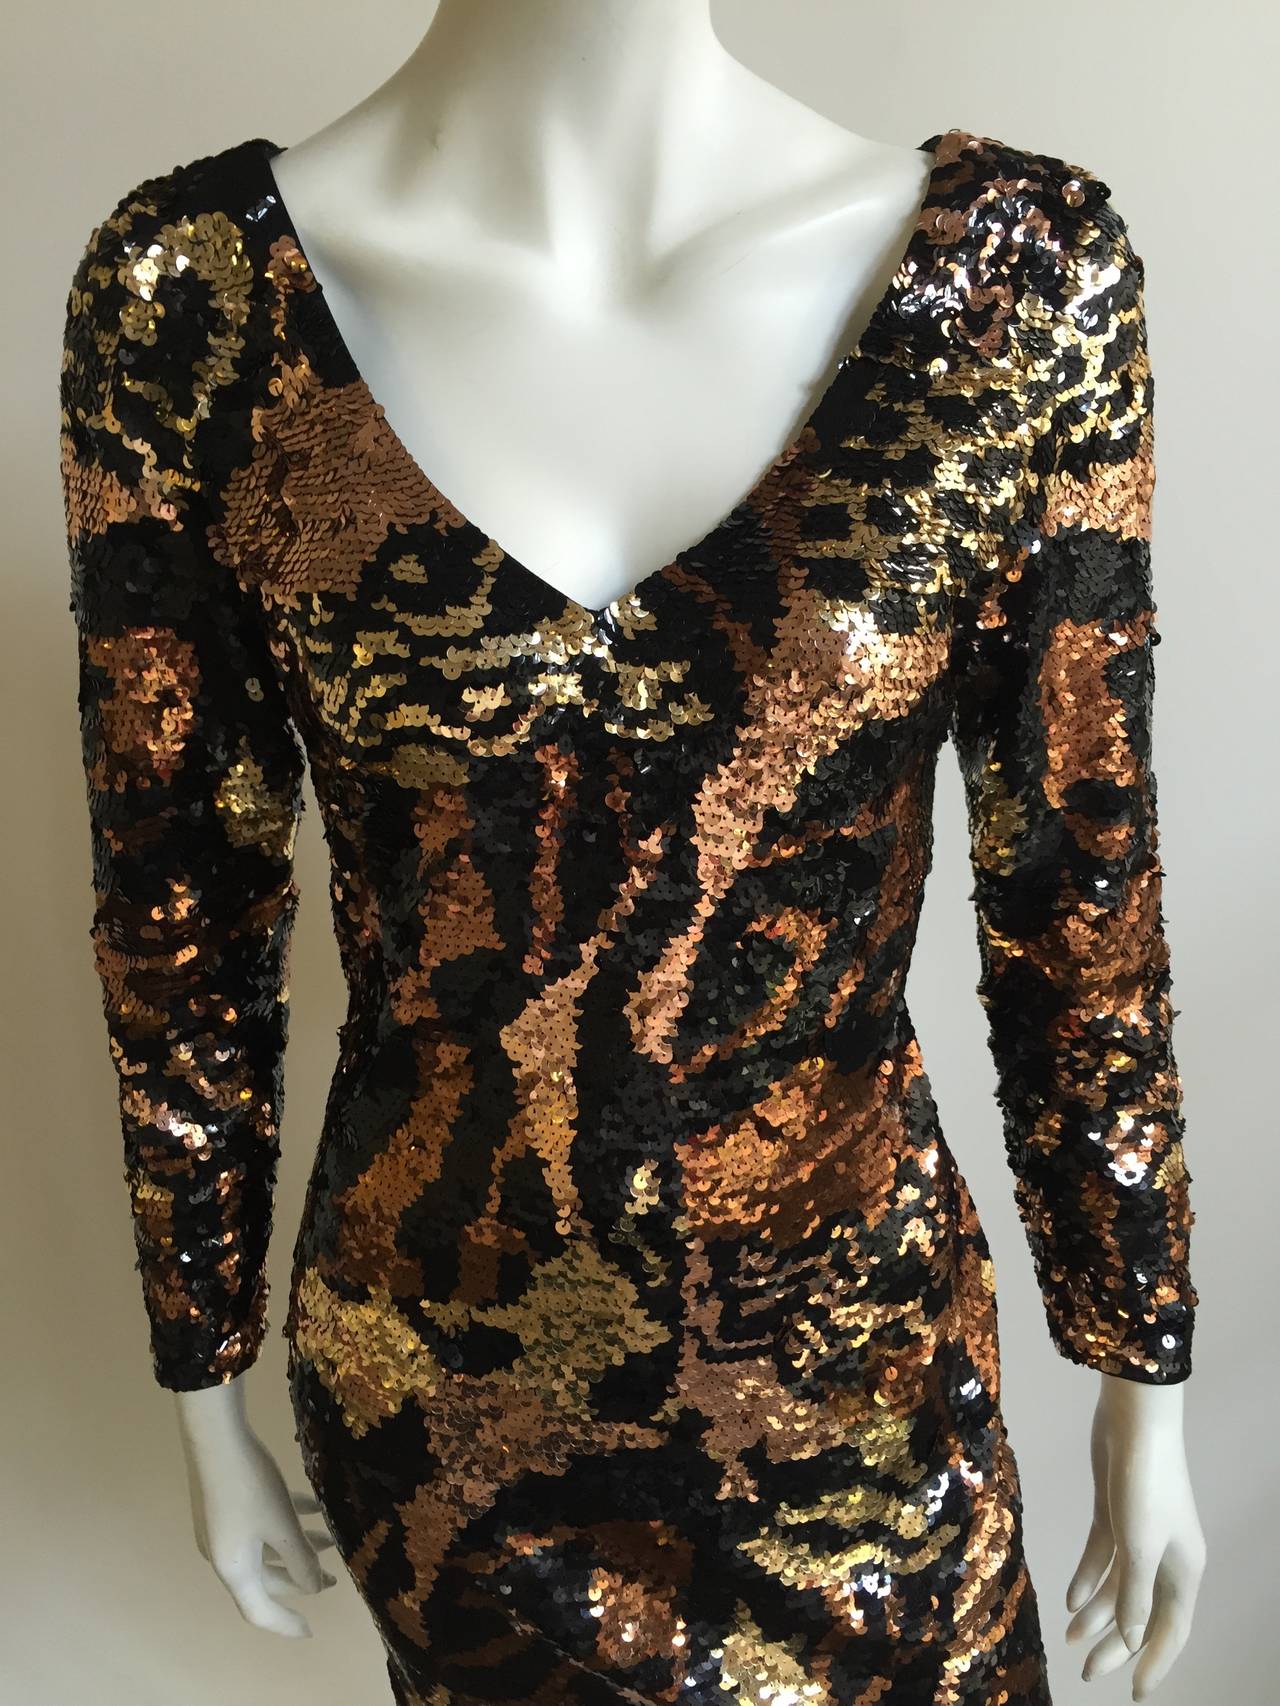 Oleg Cassini Black Tie 1980s sexy sequin dress original size 8 but fits like a modern size 6 ( Please see & use measurements). Shades of gold, bronze & copper make this pattern eye candy. Completely lined inside for added comfort with a